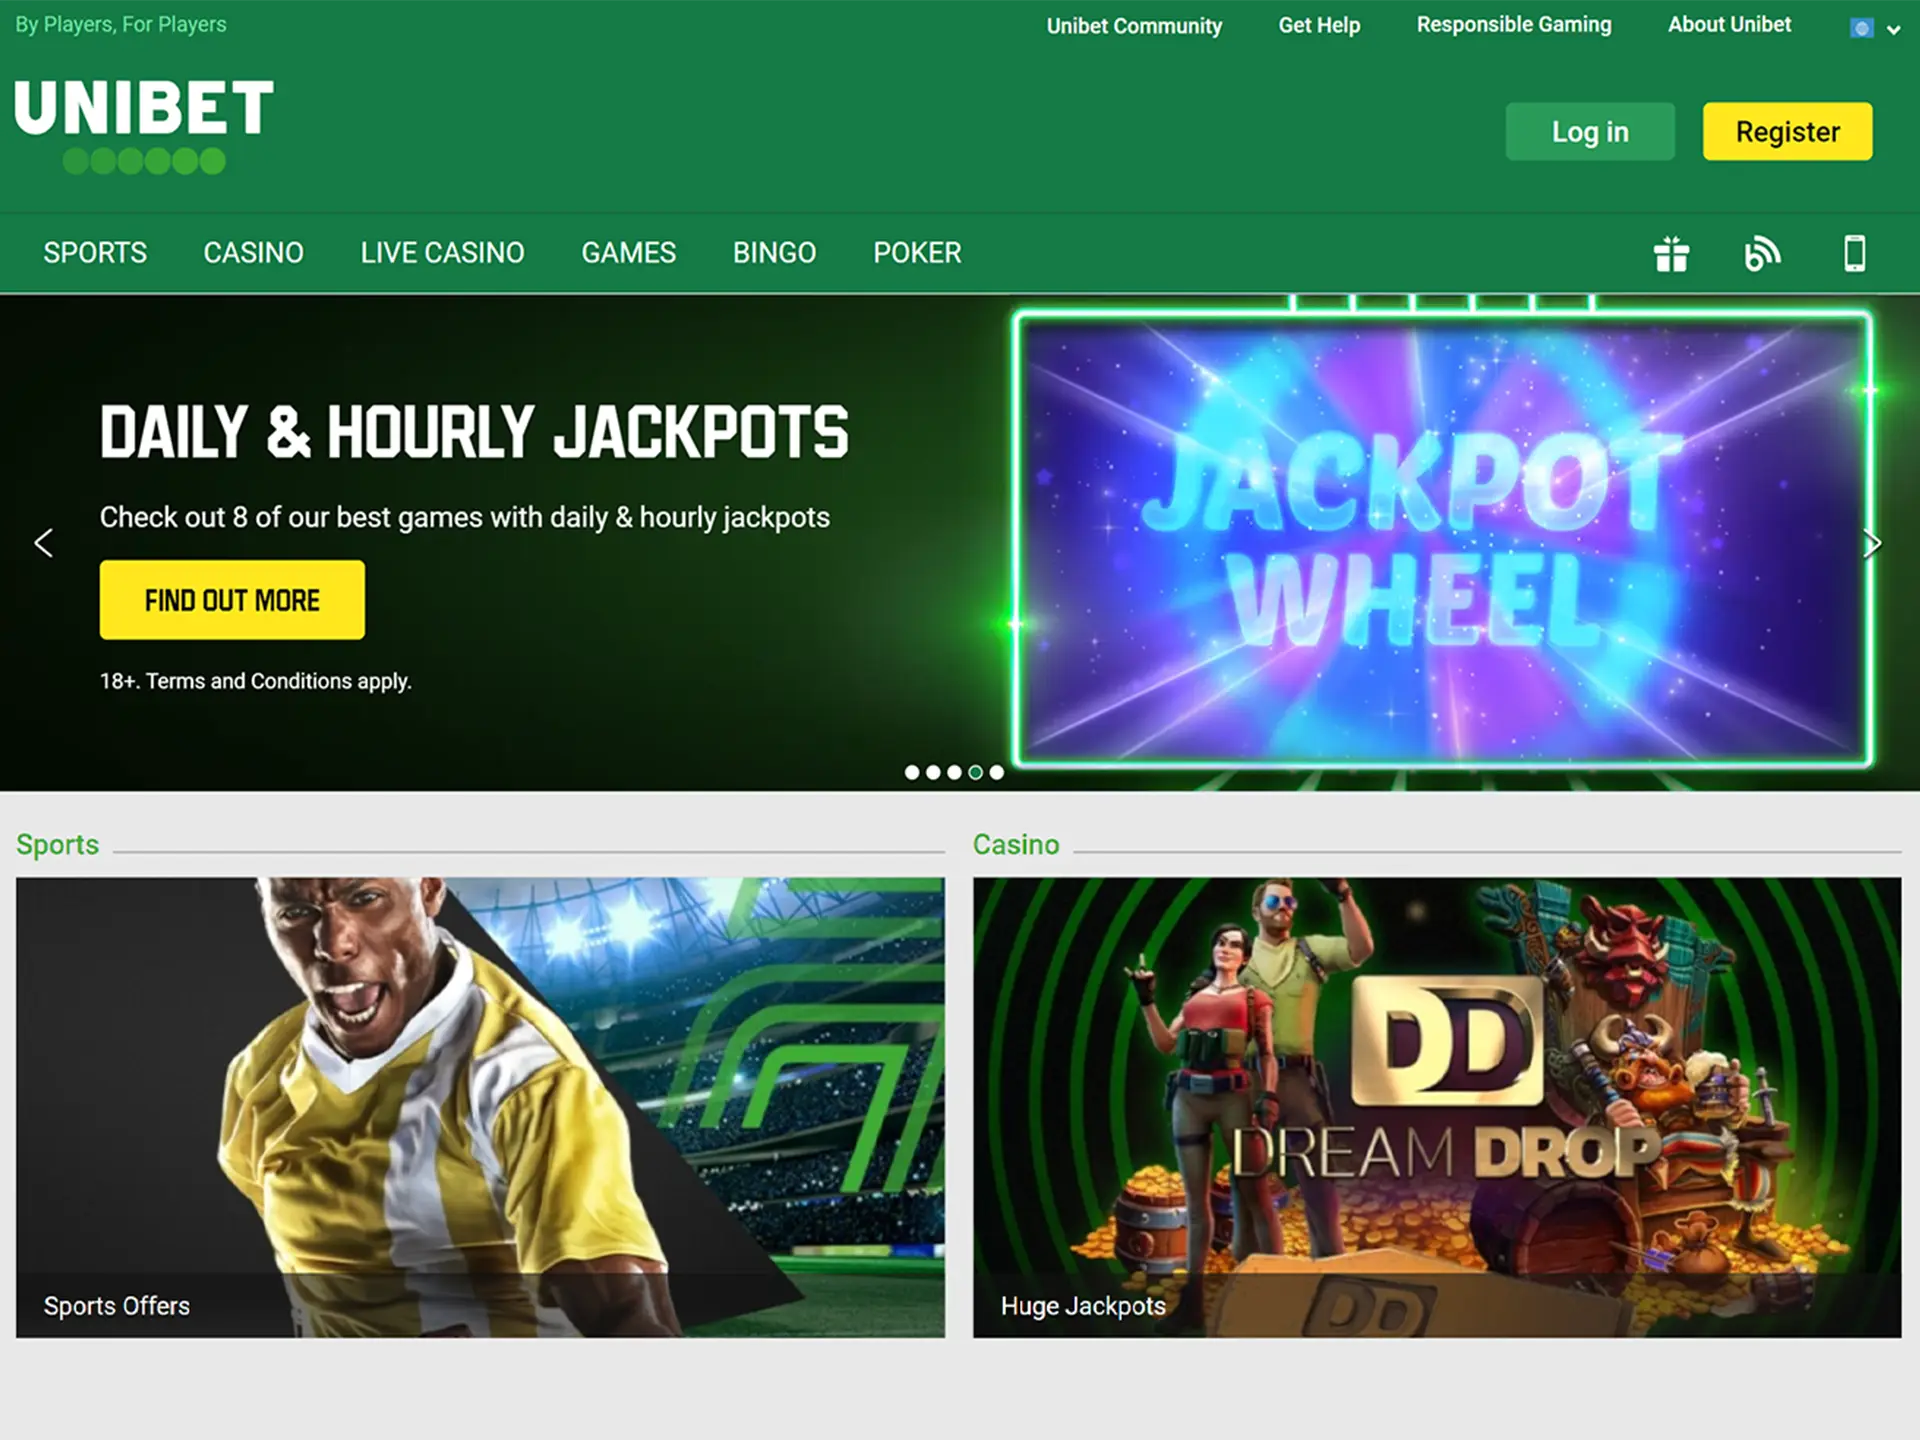 Launch your browser and open the Unibet platform.